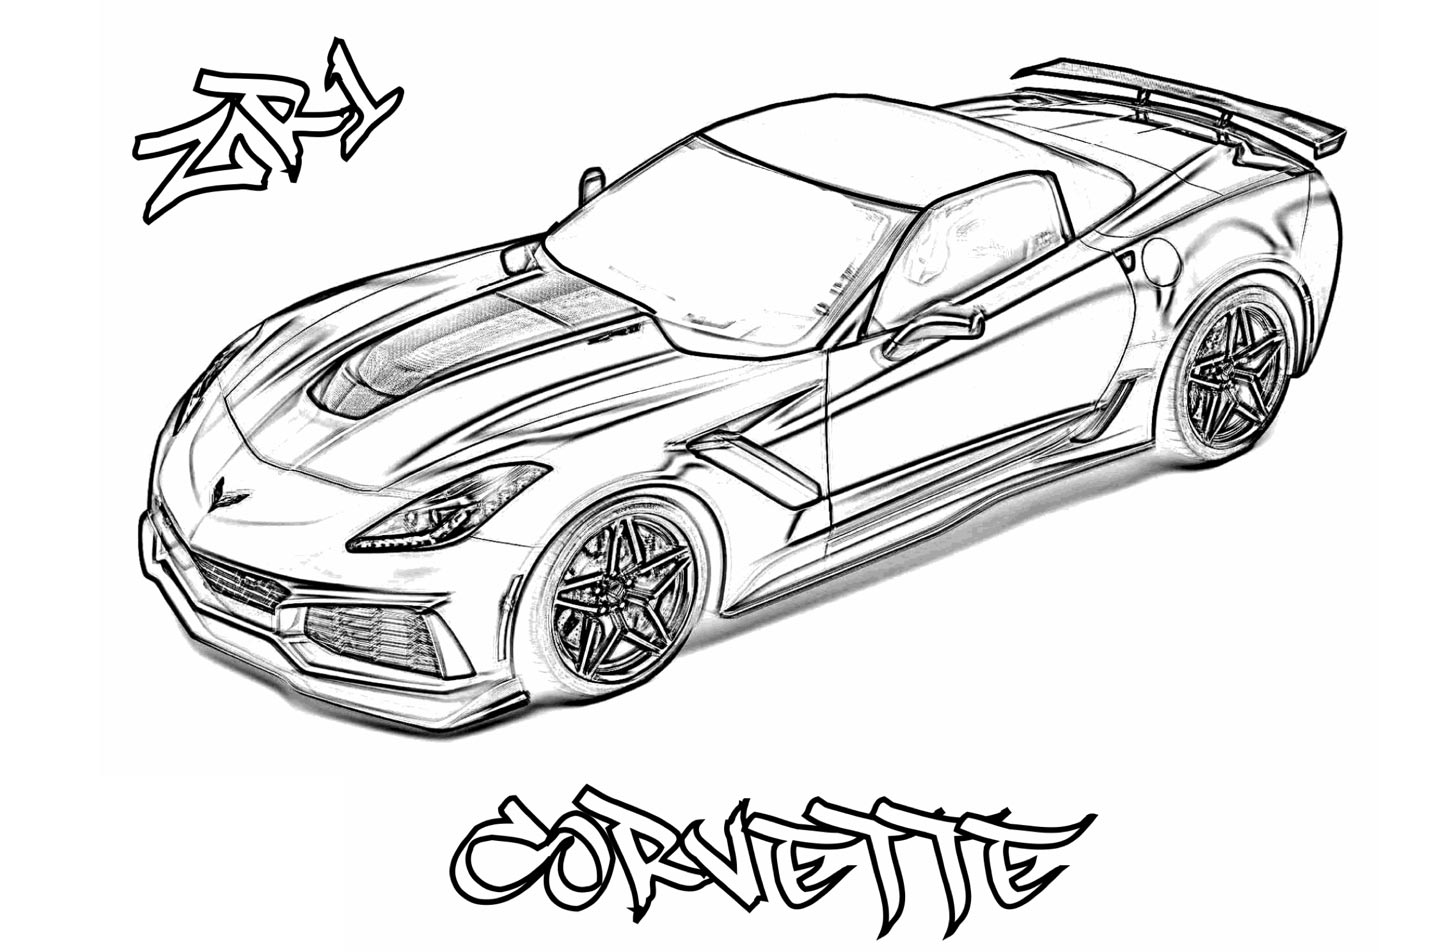 Fighting Boredom During Lockdown How About Some Corvette Coloring Pages Corvette Sales News Lifestyle Some love the new design, some don't. fighting boredom during lockdown how